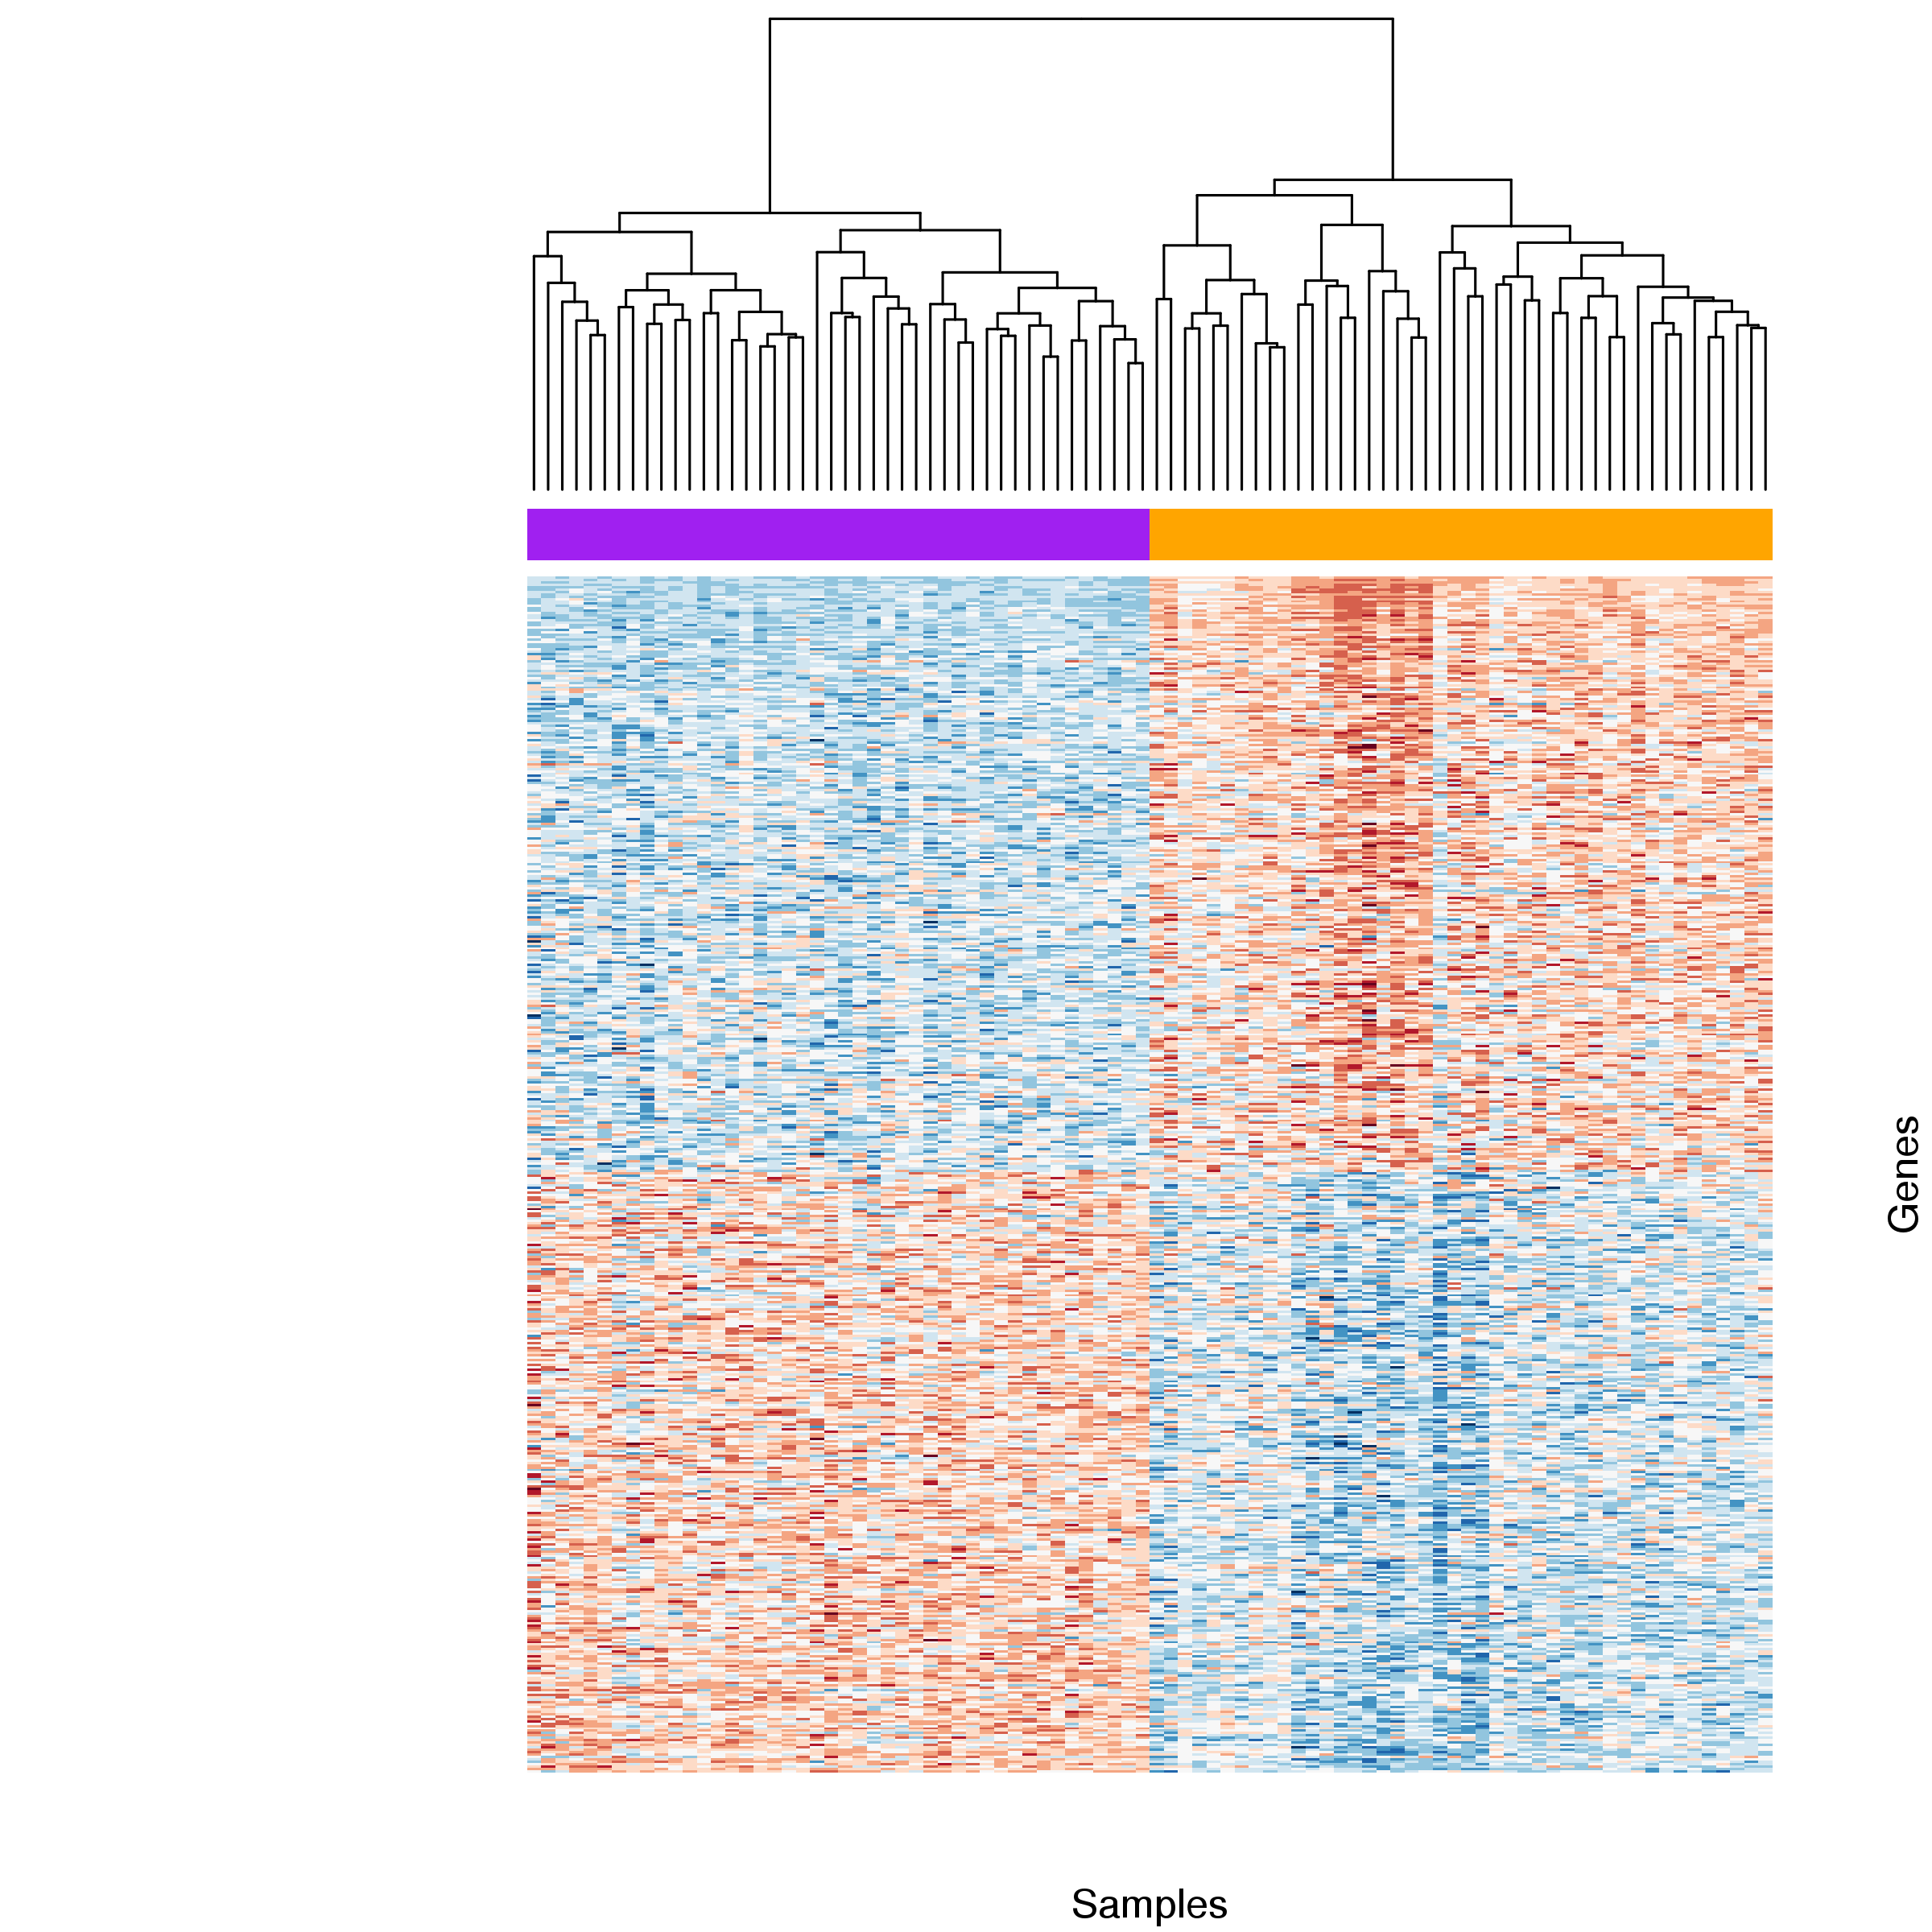 **Figure 10:** Heatmap comparing gene expression for differentially expressed genes between basal and stimulated samples. Samples were clustered by gene  with stimulated (orange) and basal (purple) samples forming two distinct groups. Expression estimates for each gene were scaled and centred across samples. Blue cells correspond to lower and red cells to higher than average expression.